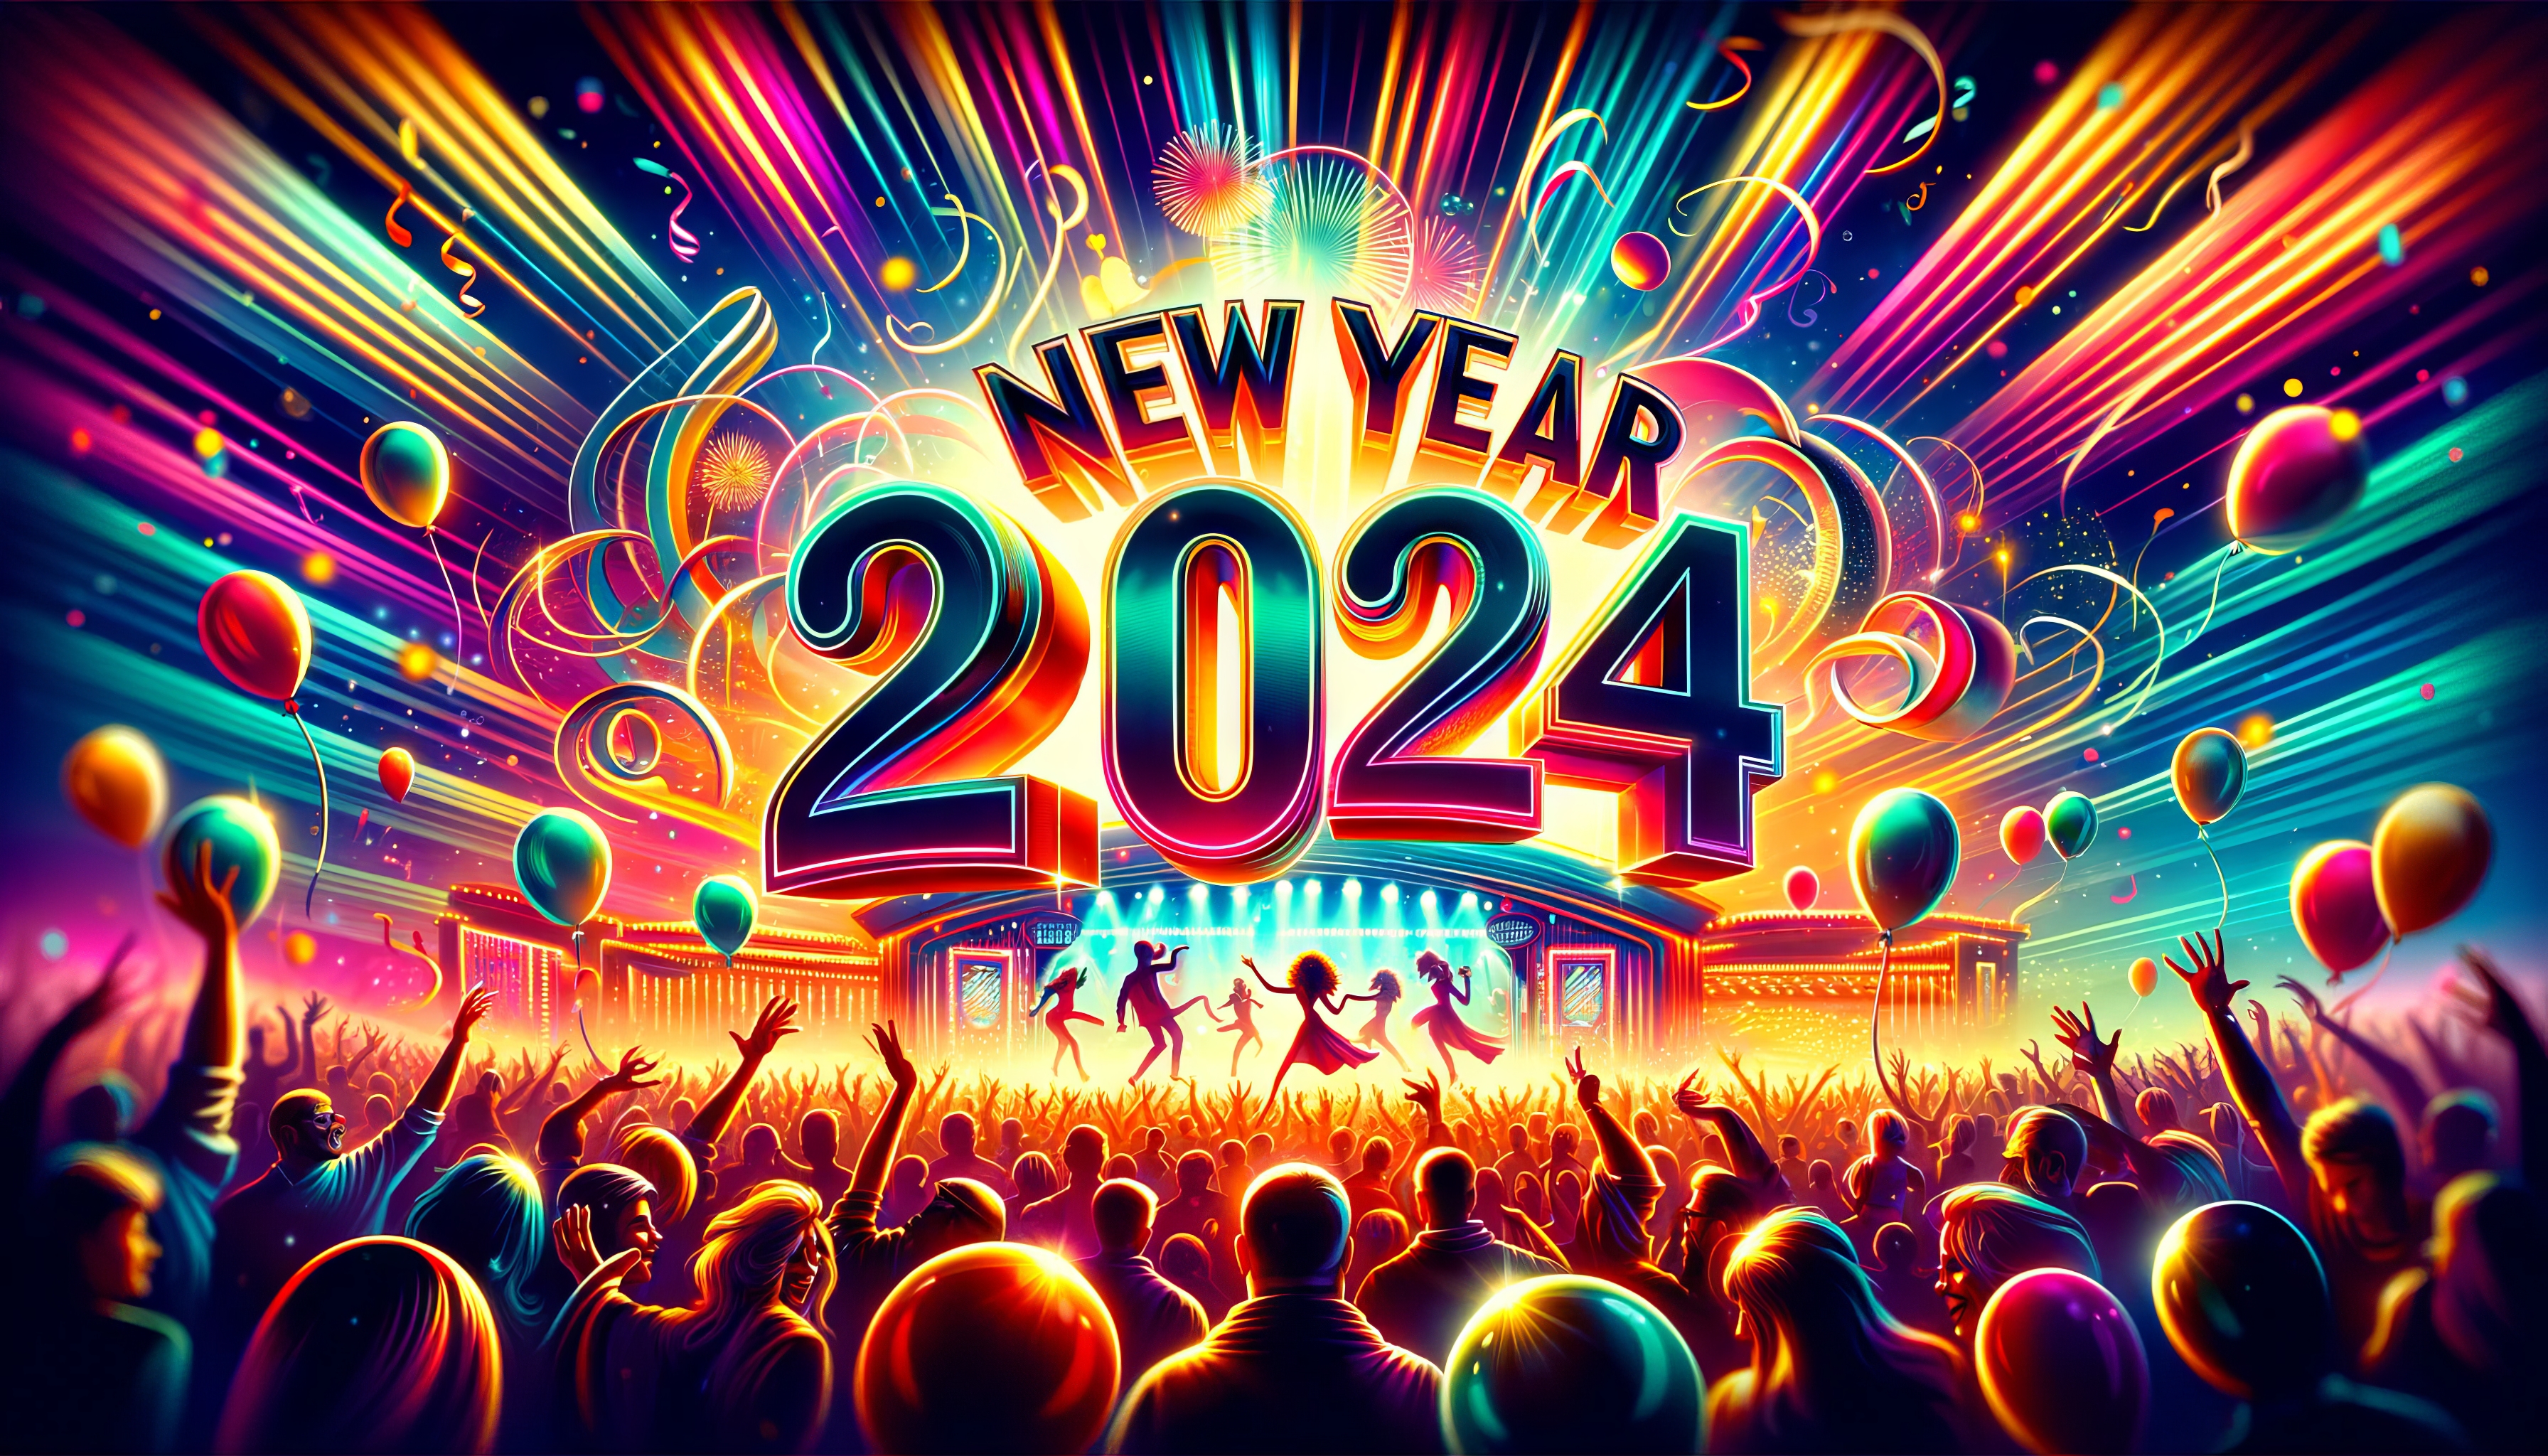 New Year 2024 celebration HD desktop wallpaper featuring vibrant crowd and festive atmosphere.